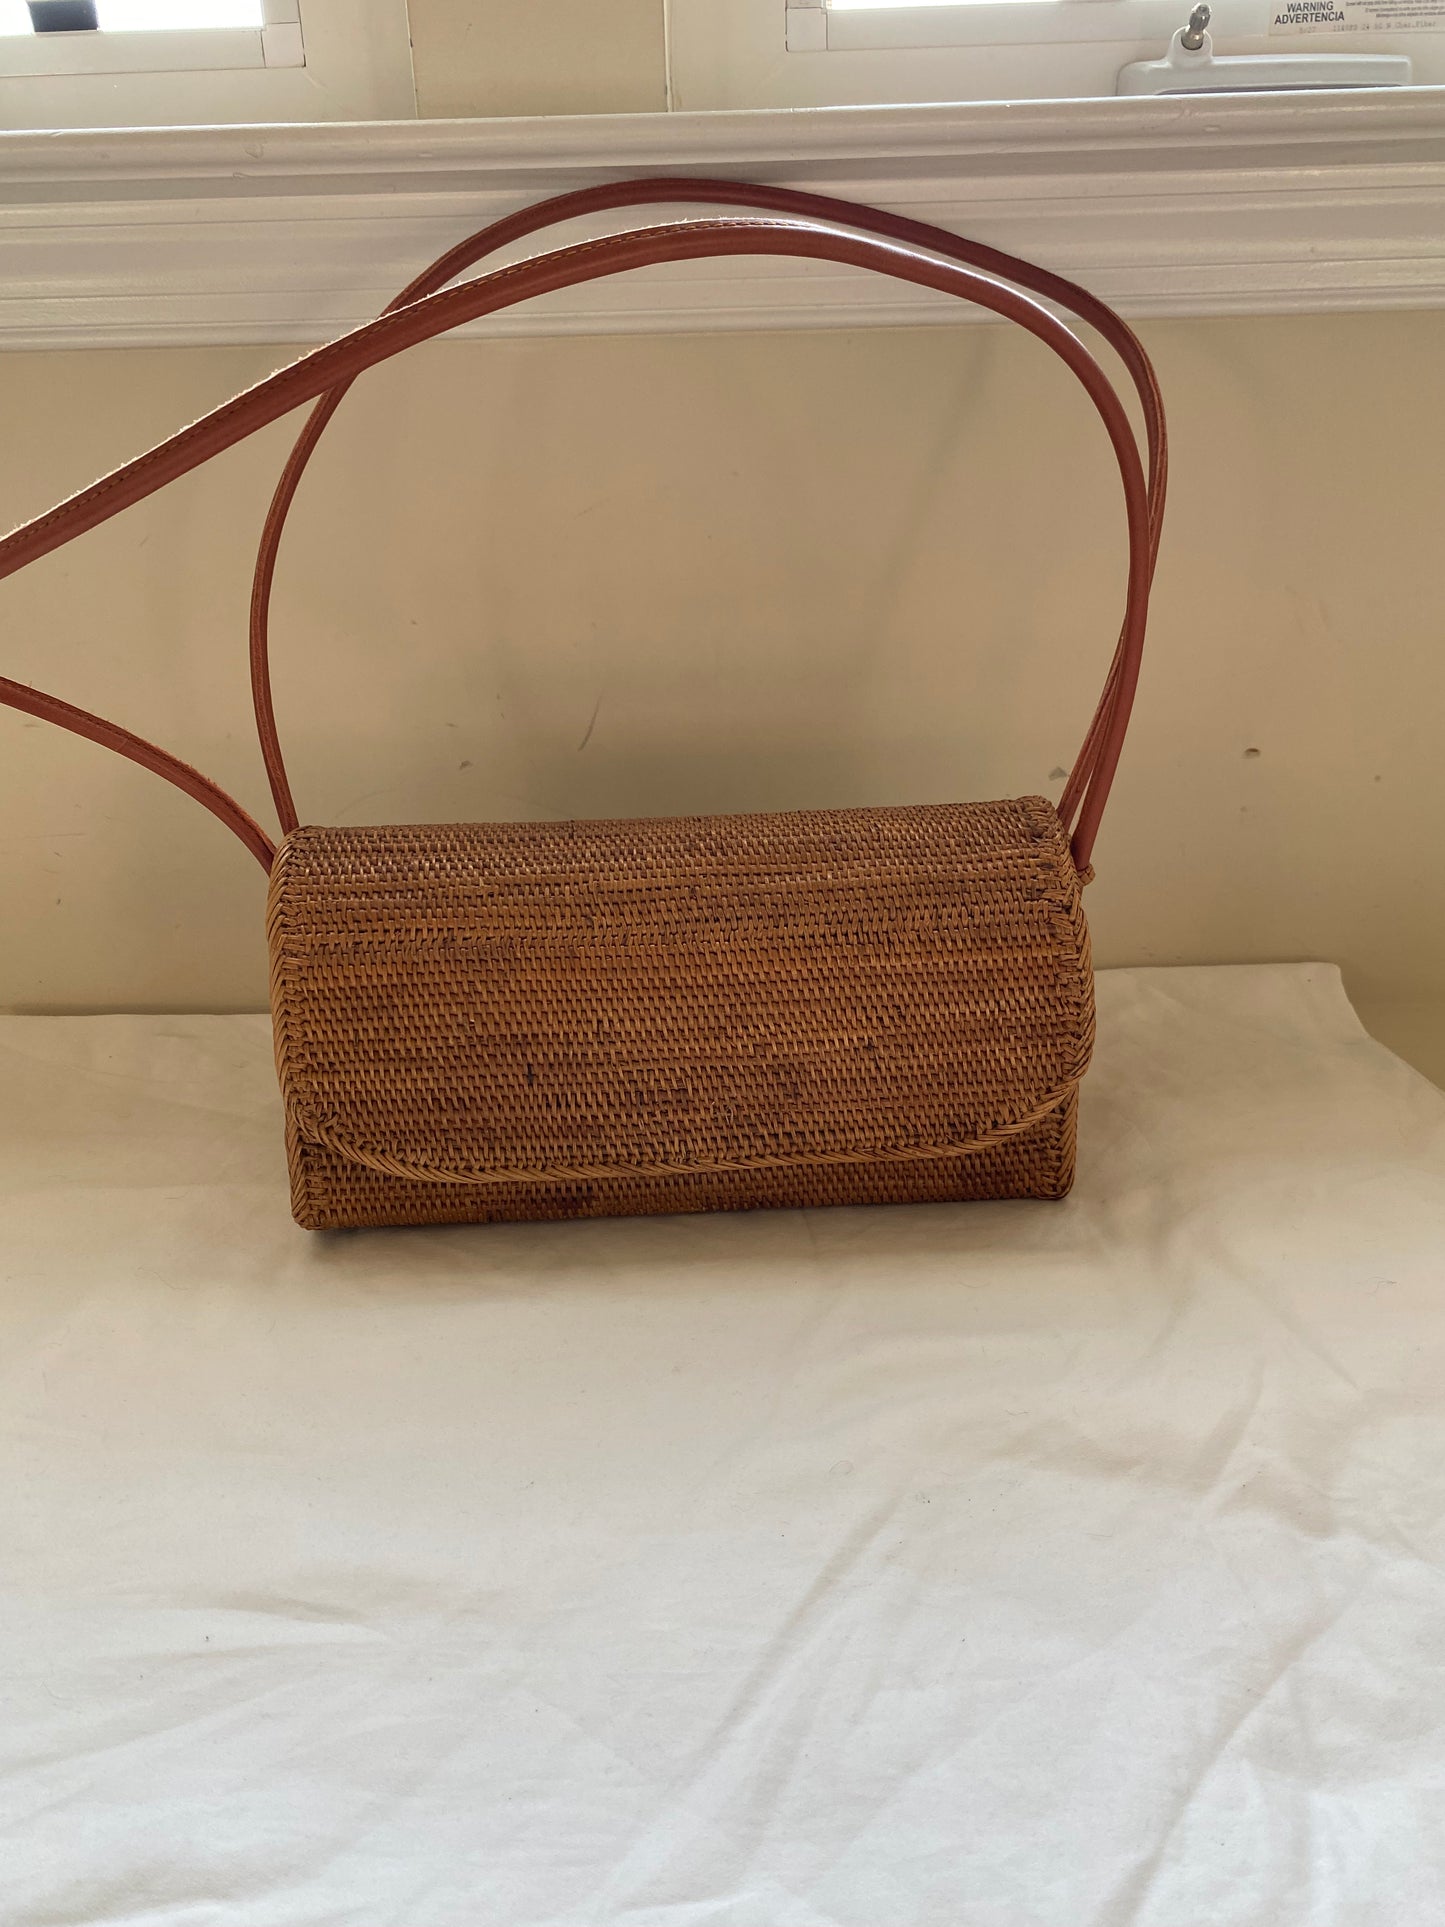 ﻿Woven Basket Bag with Leather Straps